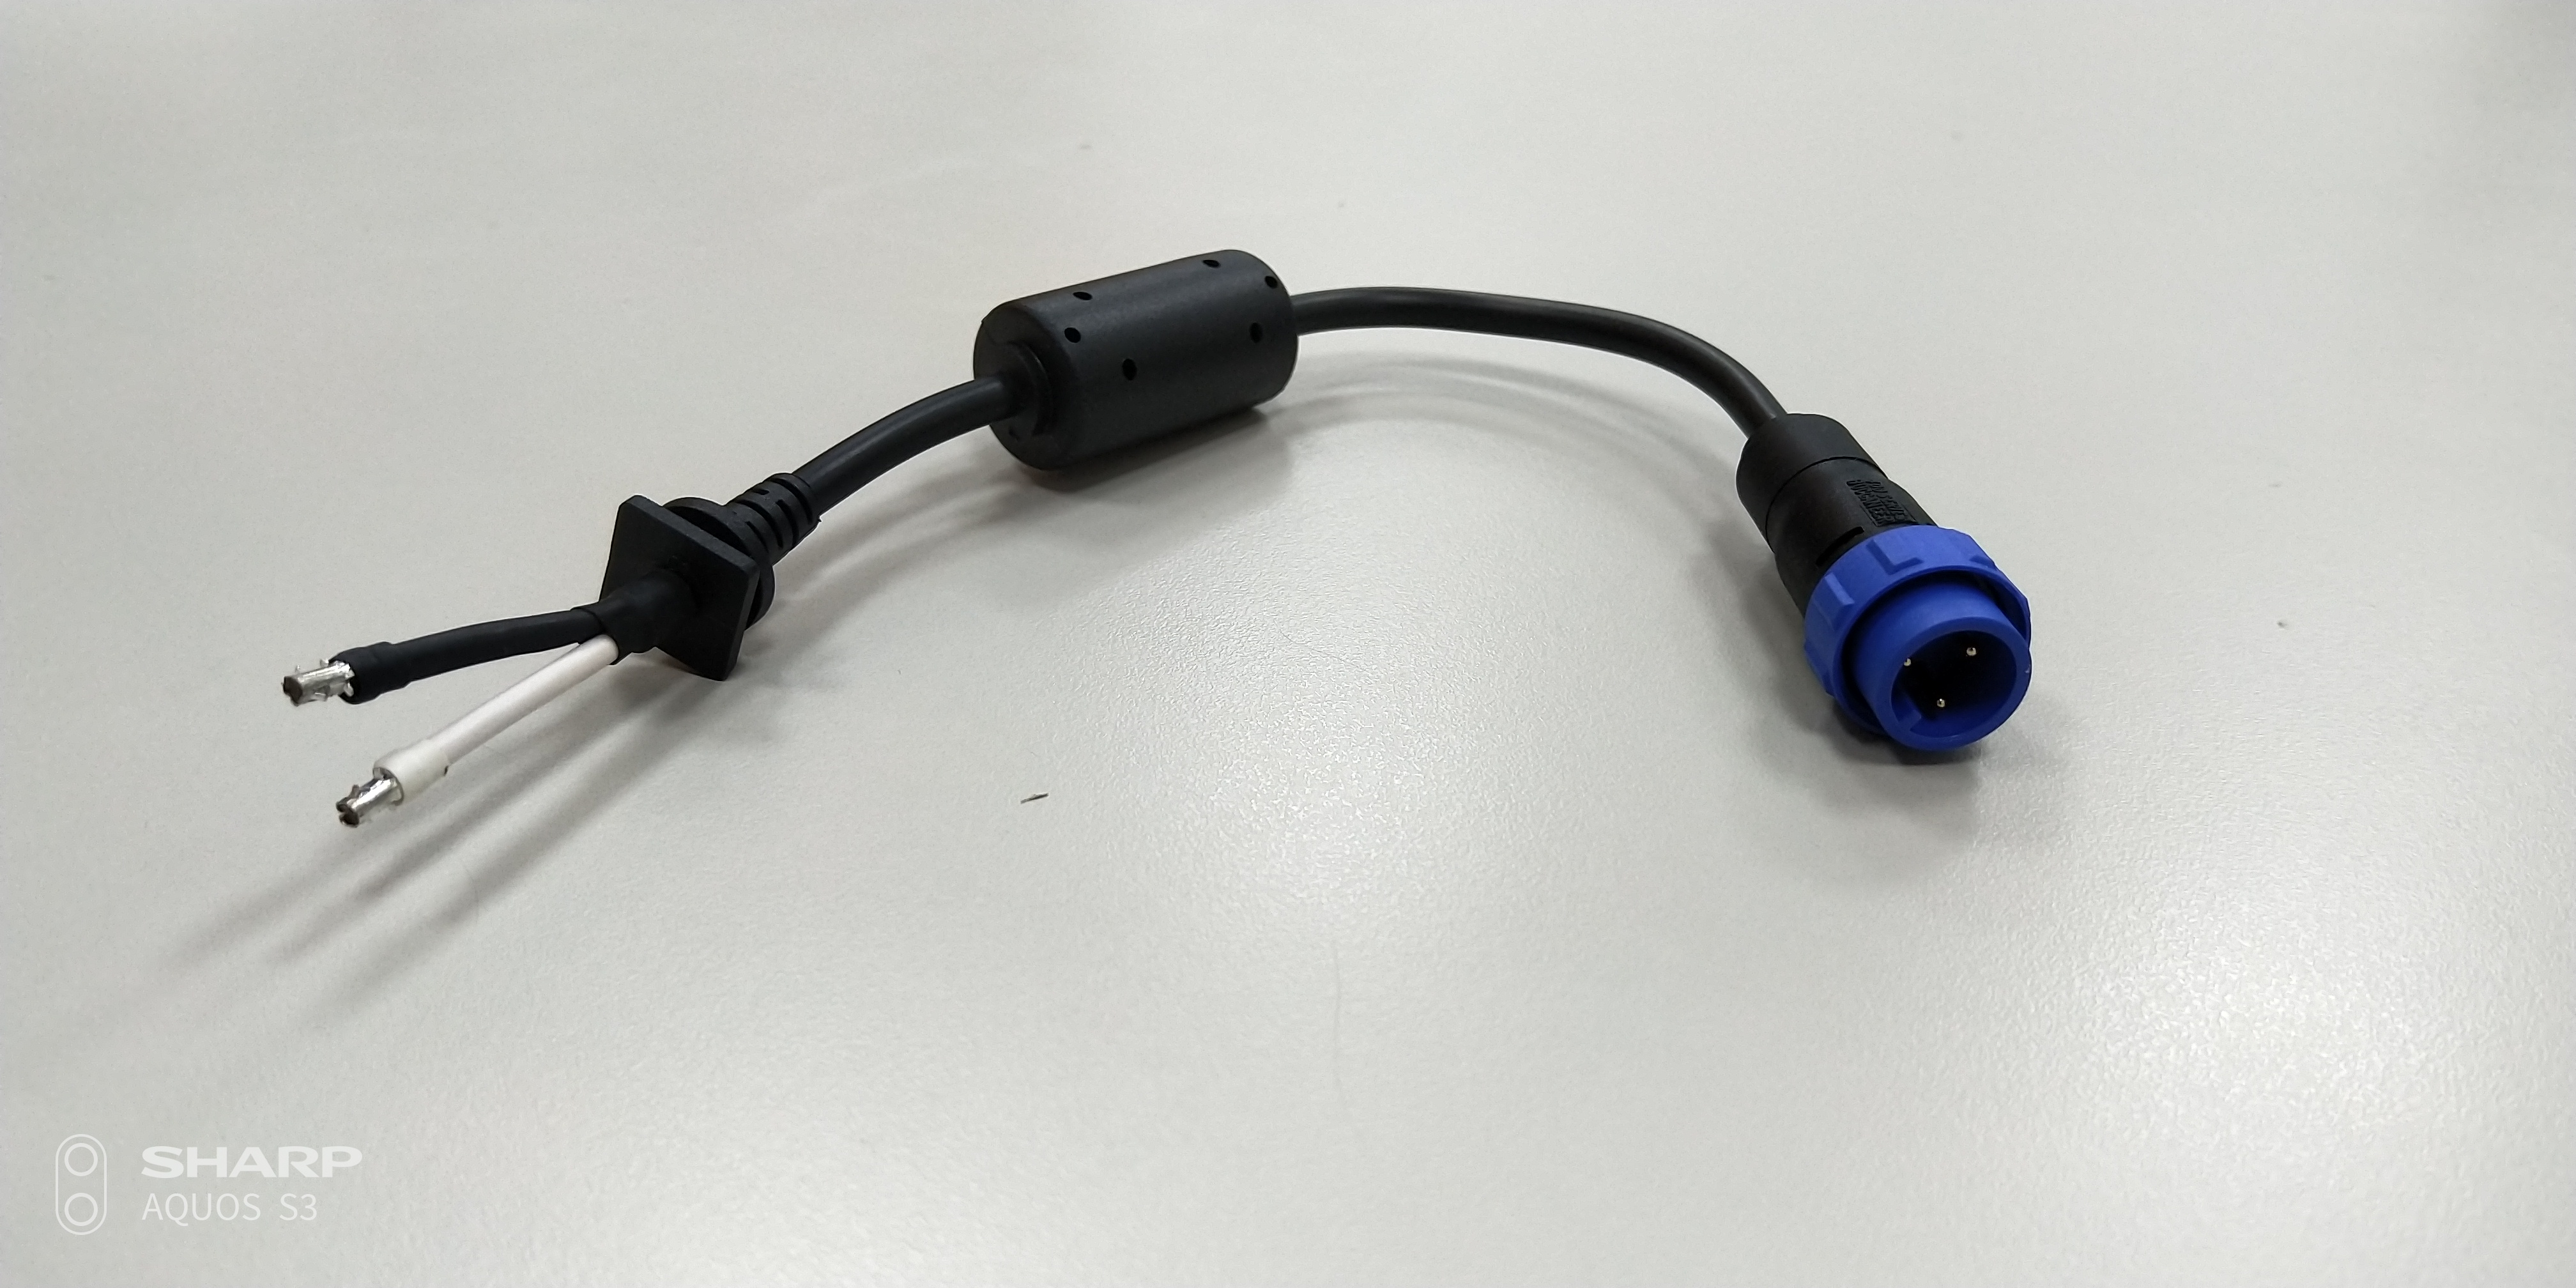 DC cable for adapter